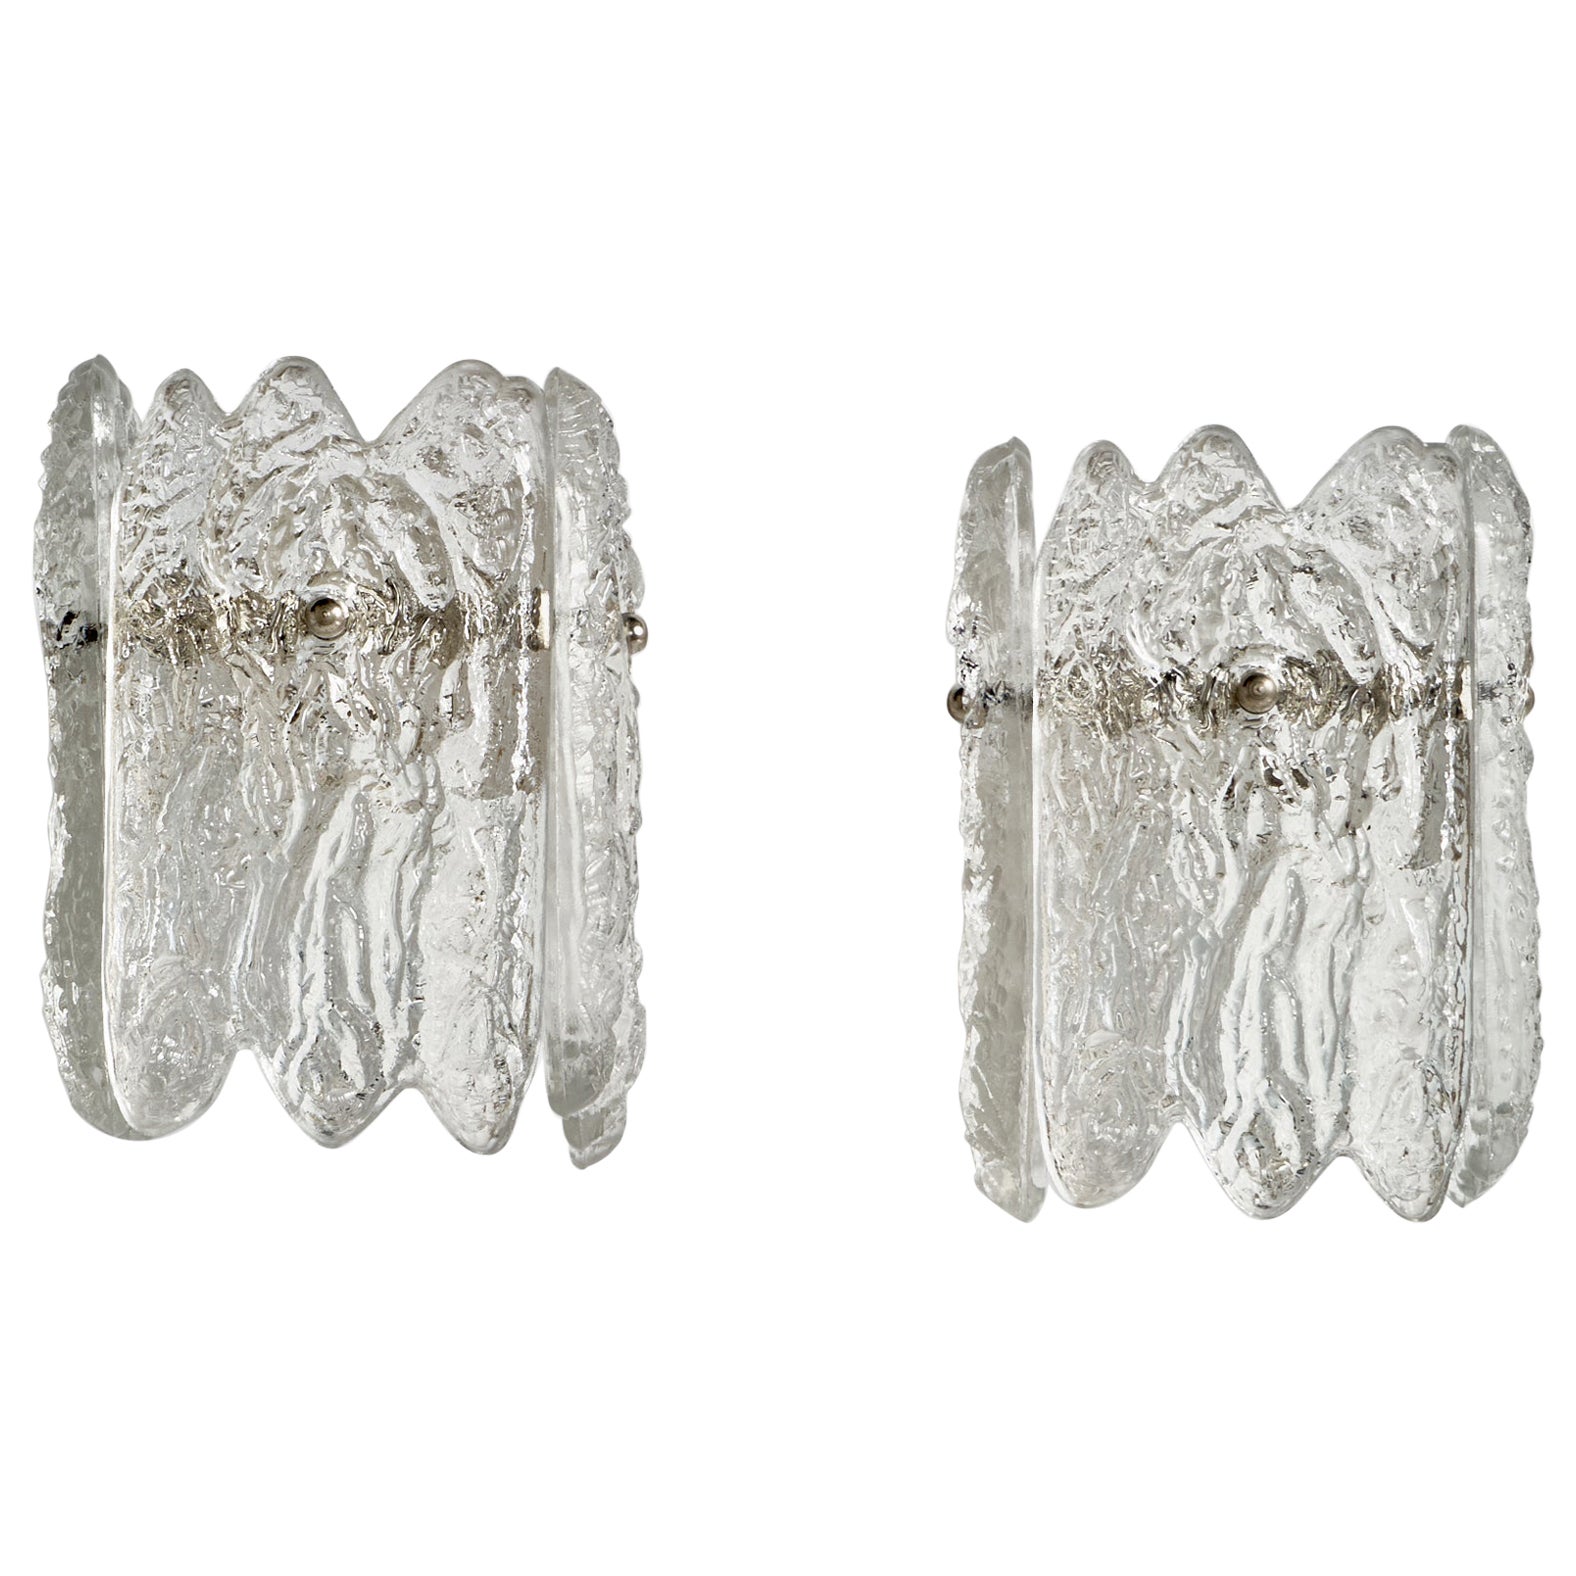 Carl Fagerlund, Wall Lights, Glass, Metal, Sweden, 1950s For Sale